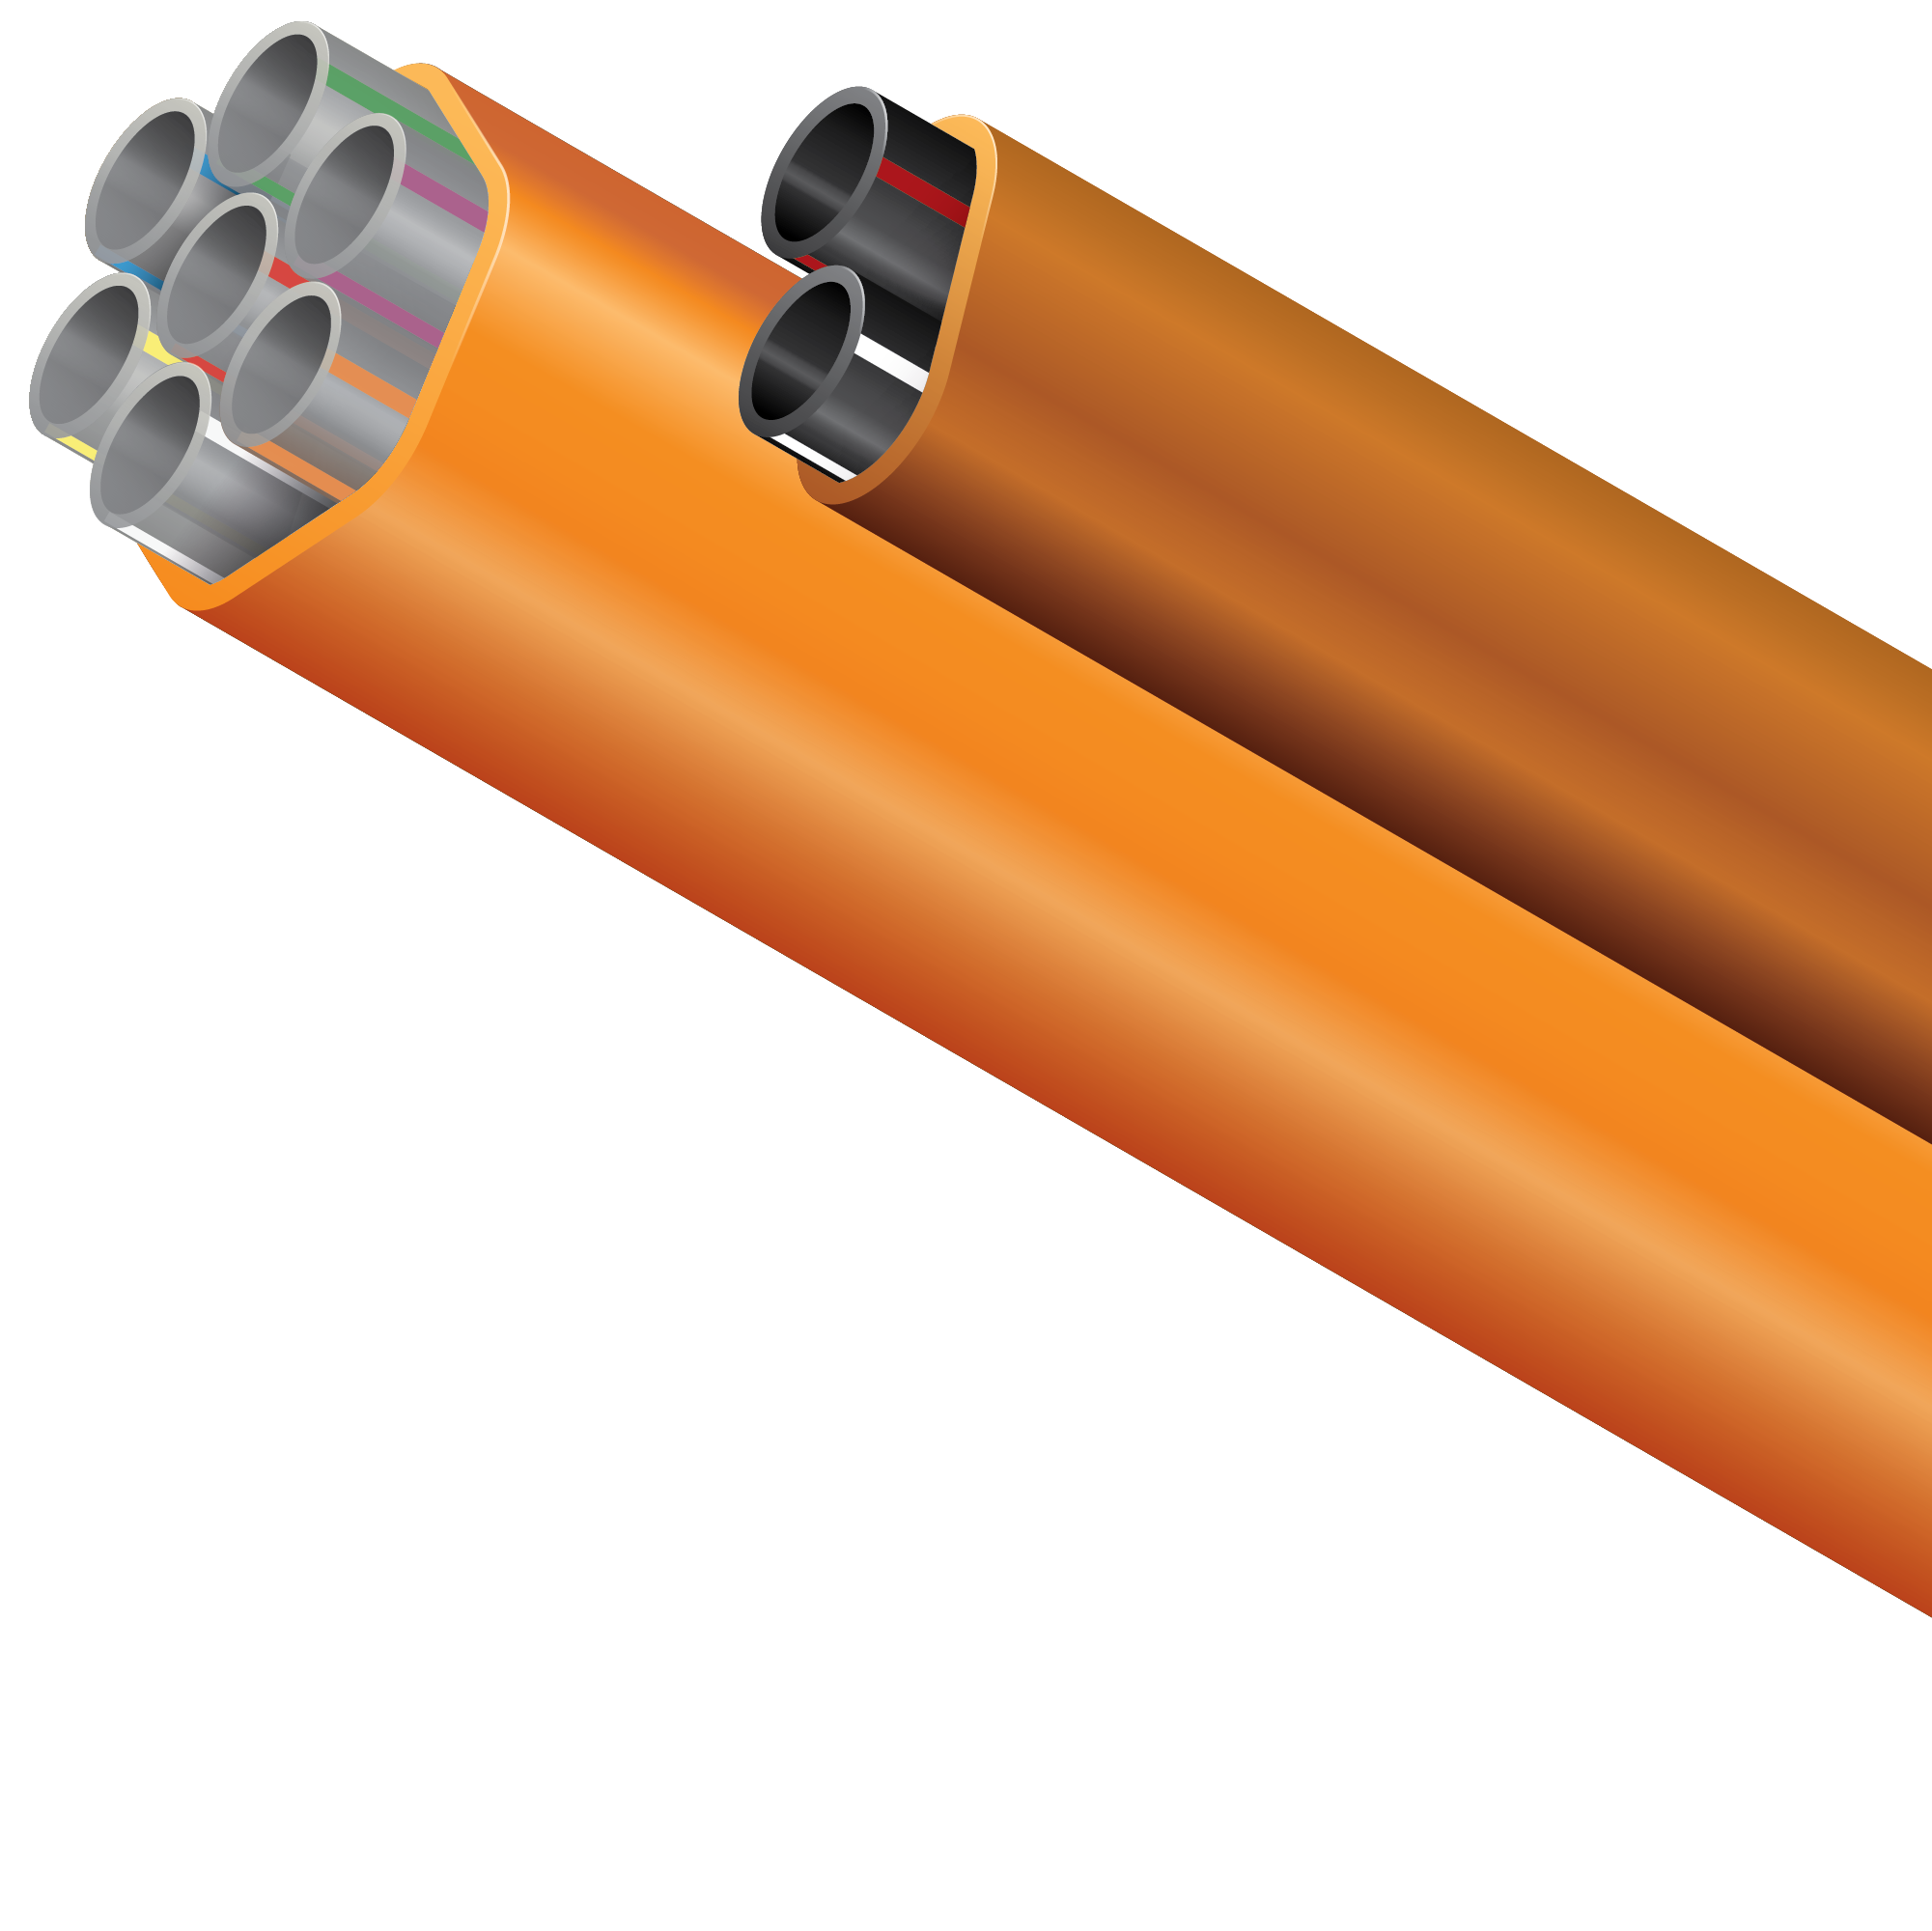 A bundle of MicroDucts which use up to 100% reground High-Density Polyethylene (HDPE) from Dura-Line’s own internal manufacturing process. FuturePath® ECO contributes to lower scope 3 emissions for network operators and is suitable for direct-buried or sub-duct installation in outdoor optical communications networks. All standard MicroDuct sizes and bundle combinations are available, and all products meet stipulated parameters for regular MicroDuct products.